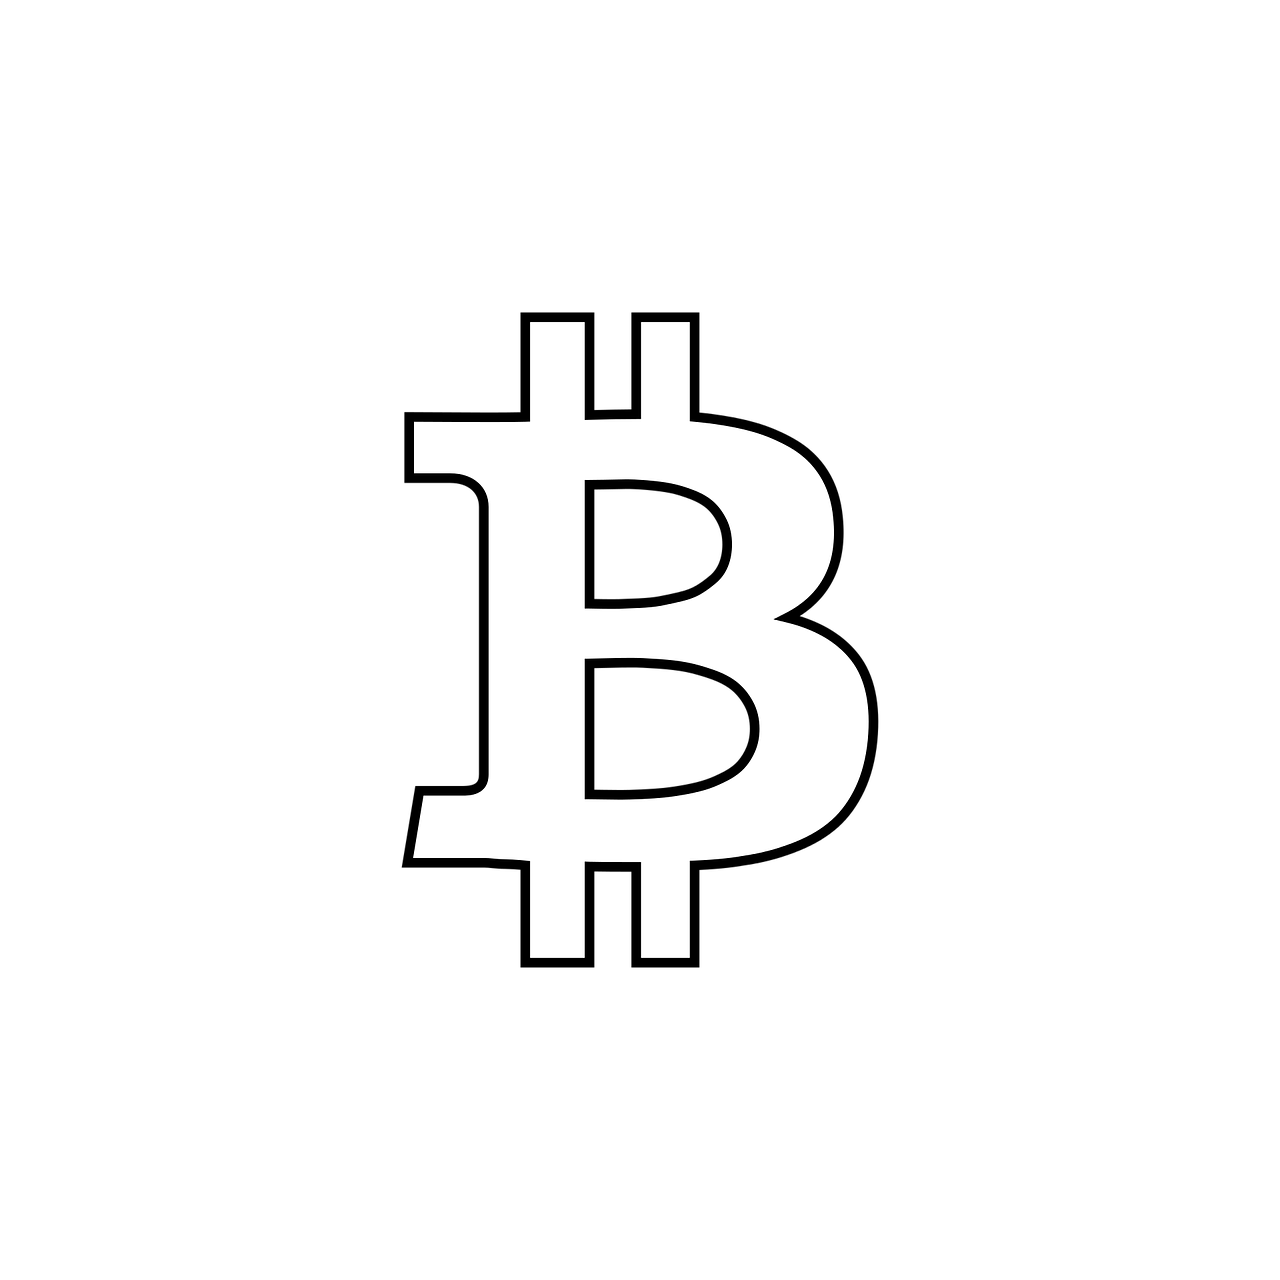 bitcoin currency icon free photo